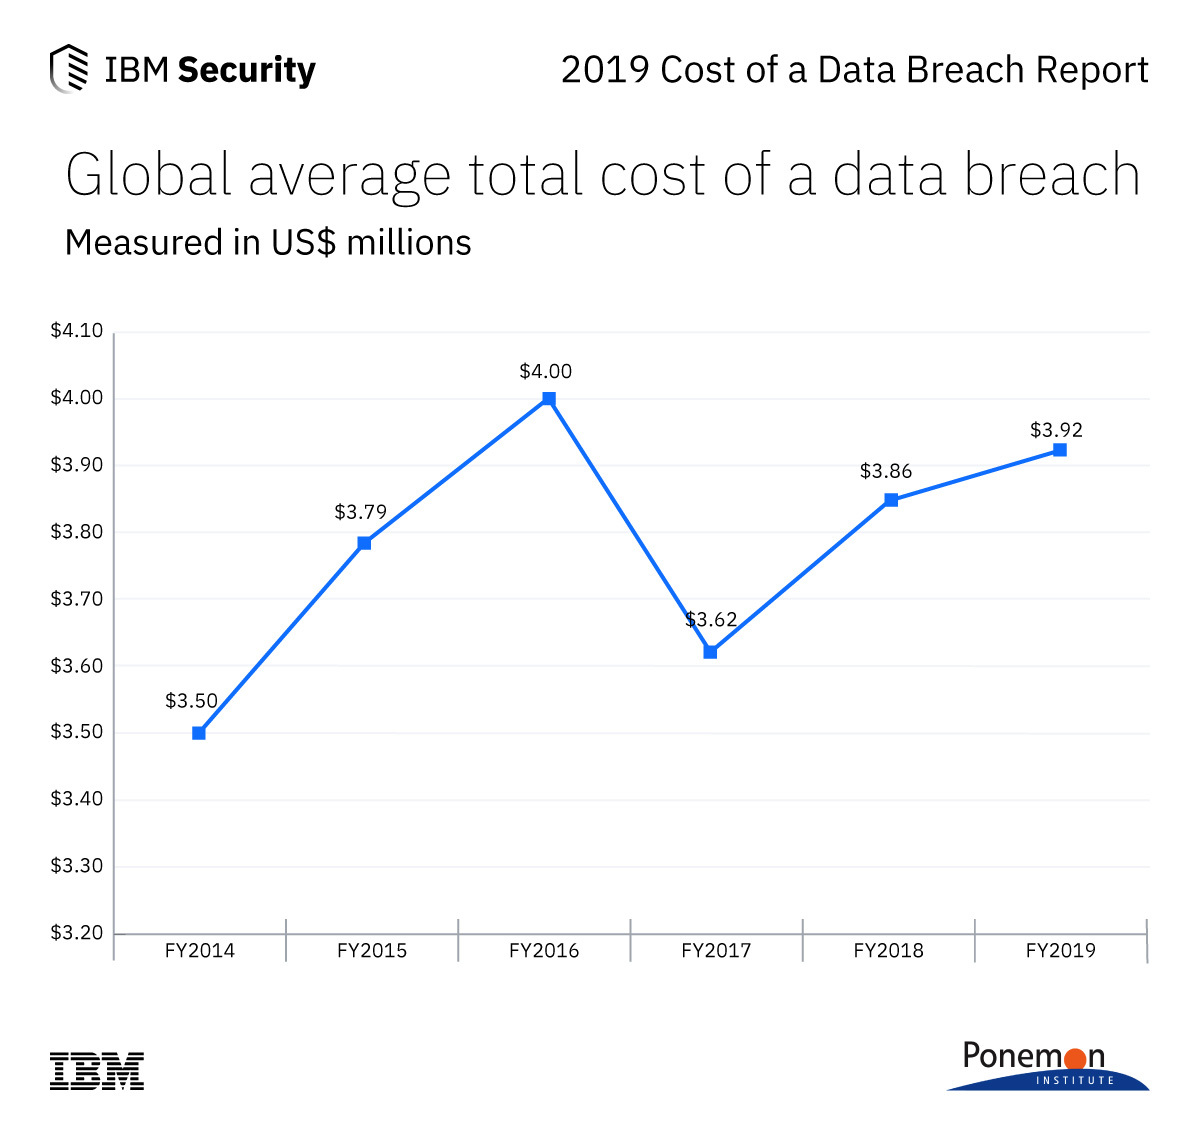 What S New In The 19 Cost Of A Data Breach Report